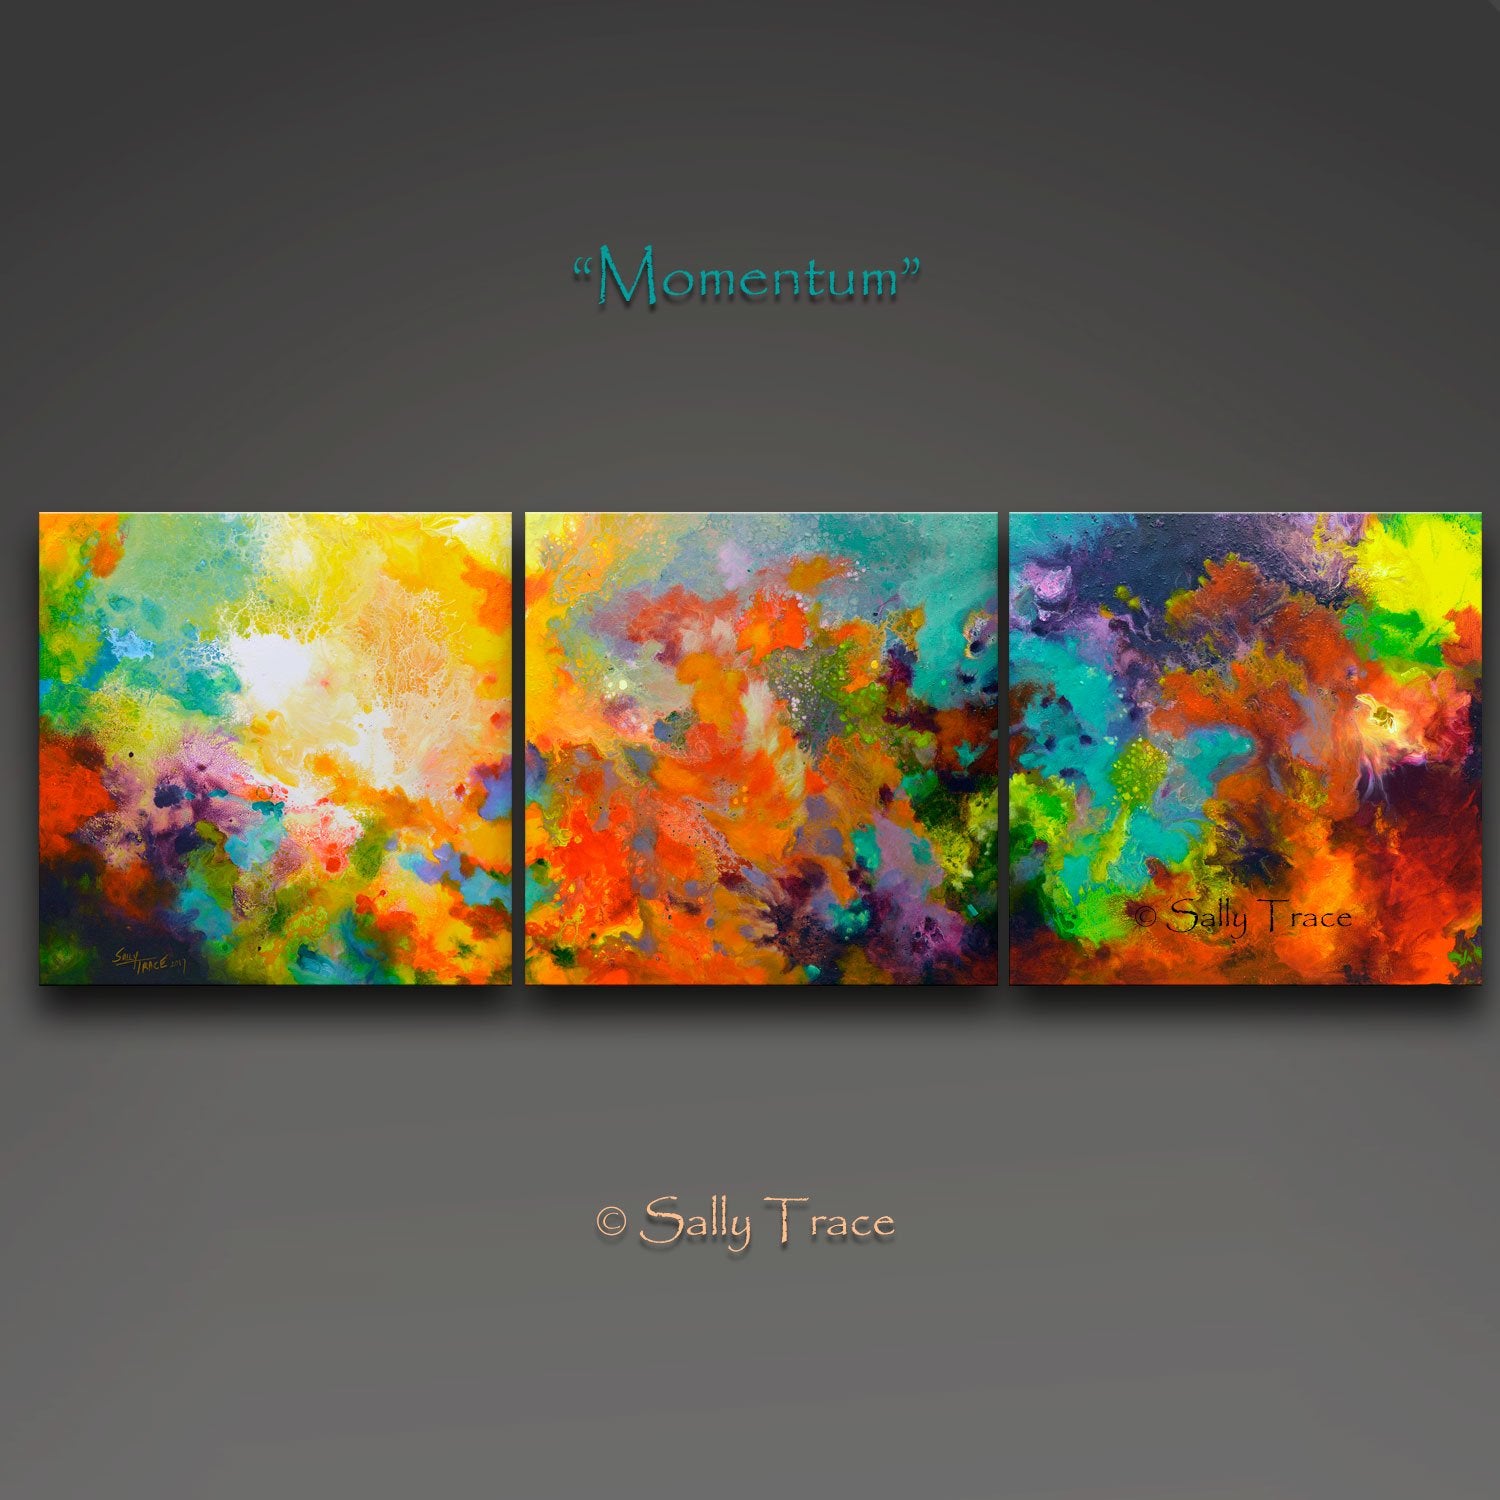 Momentum, contemporary abstract art triptych painting prints on canvas by Sally Trace. Large contemporary colorful modern modern art triptych prints on stretched canvas made from my original acrylic painting "Momentum".  Coral, teal, yellow, violet and turquoise fine art prints for your bedroom, office, living room, dining room.  Modern artwork horizontal prints for sale online, orange turquoise art.